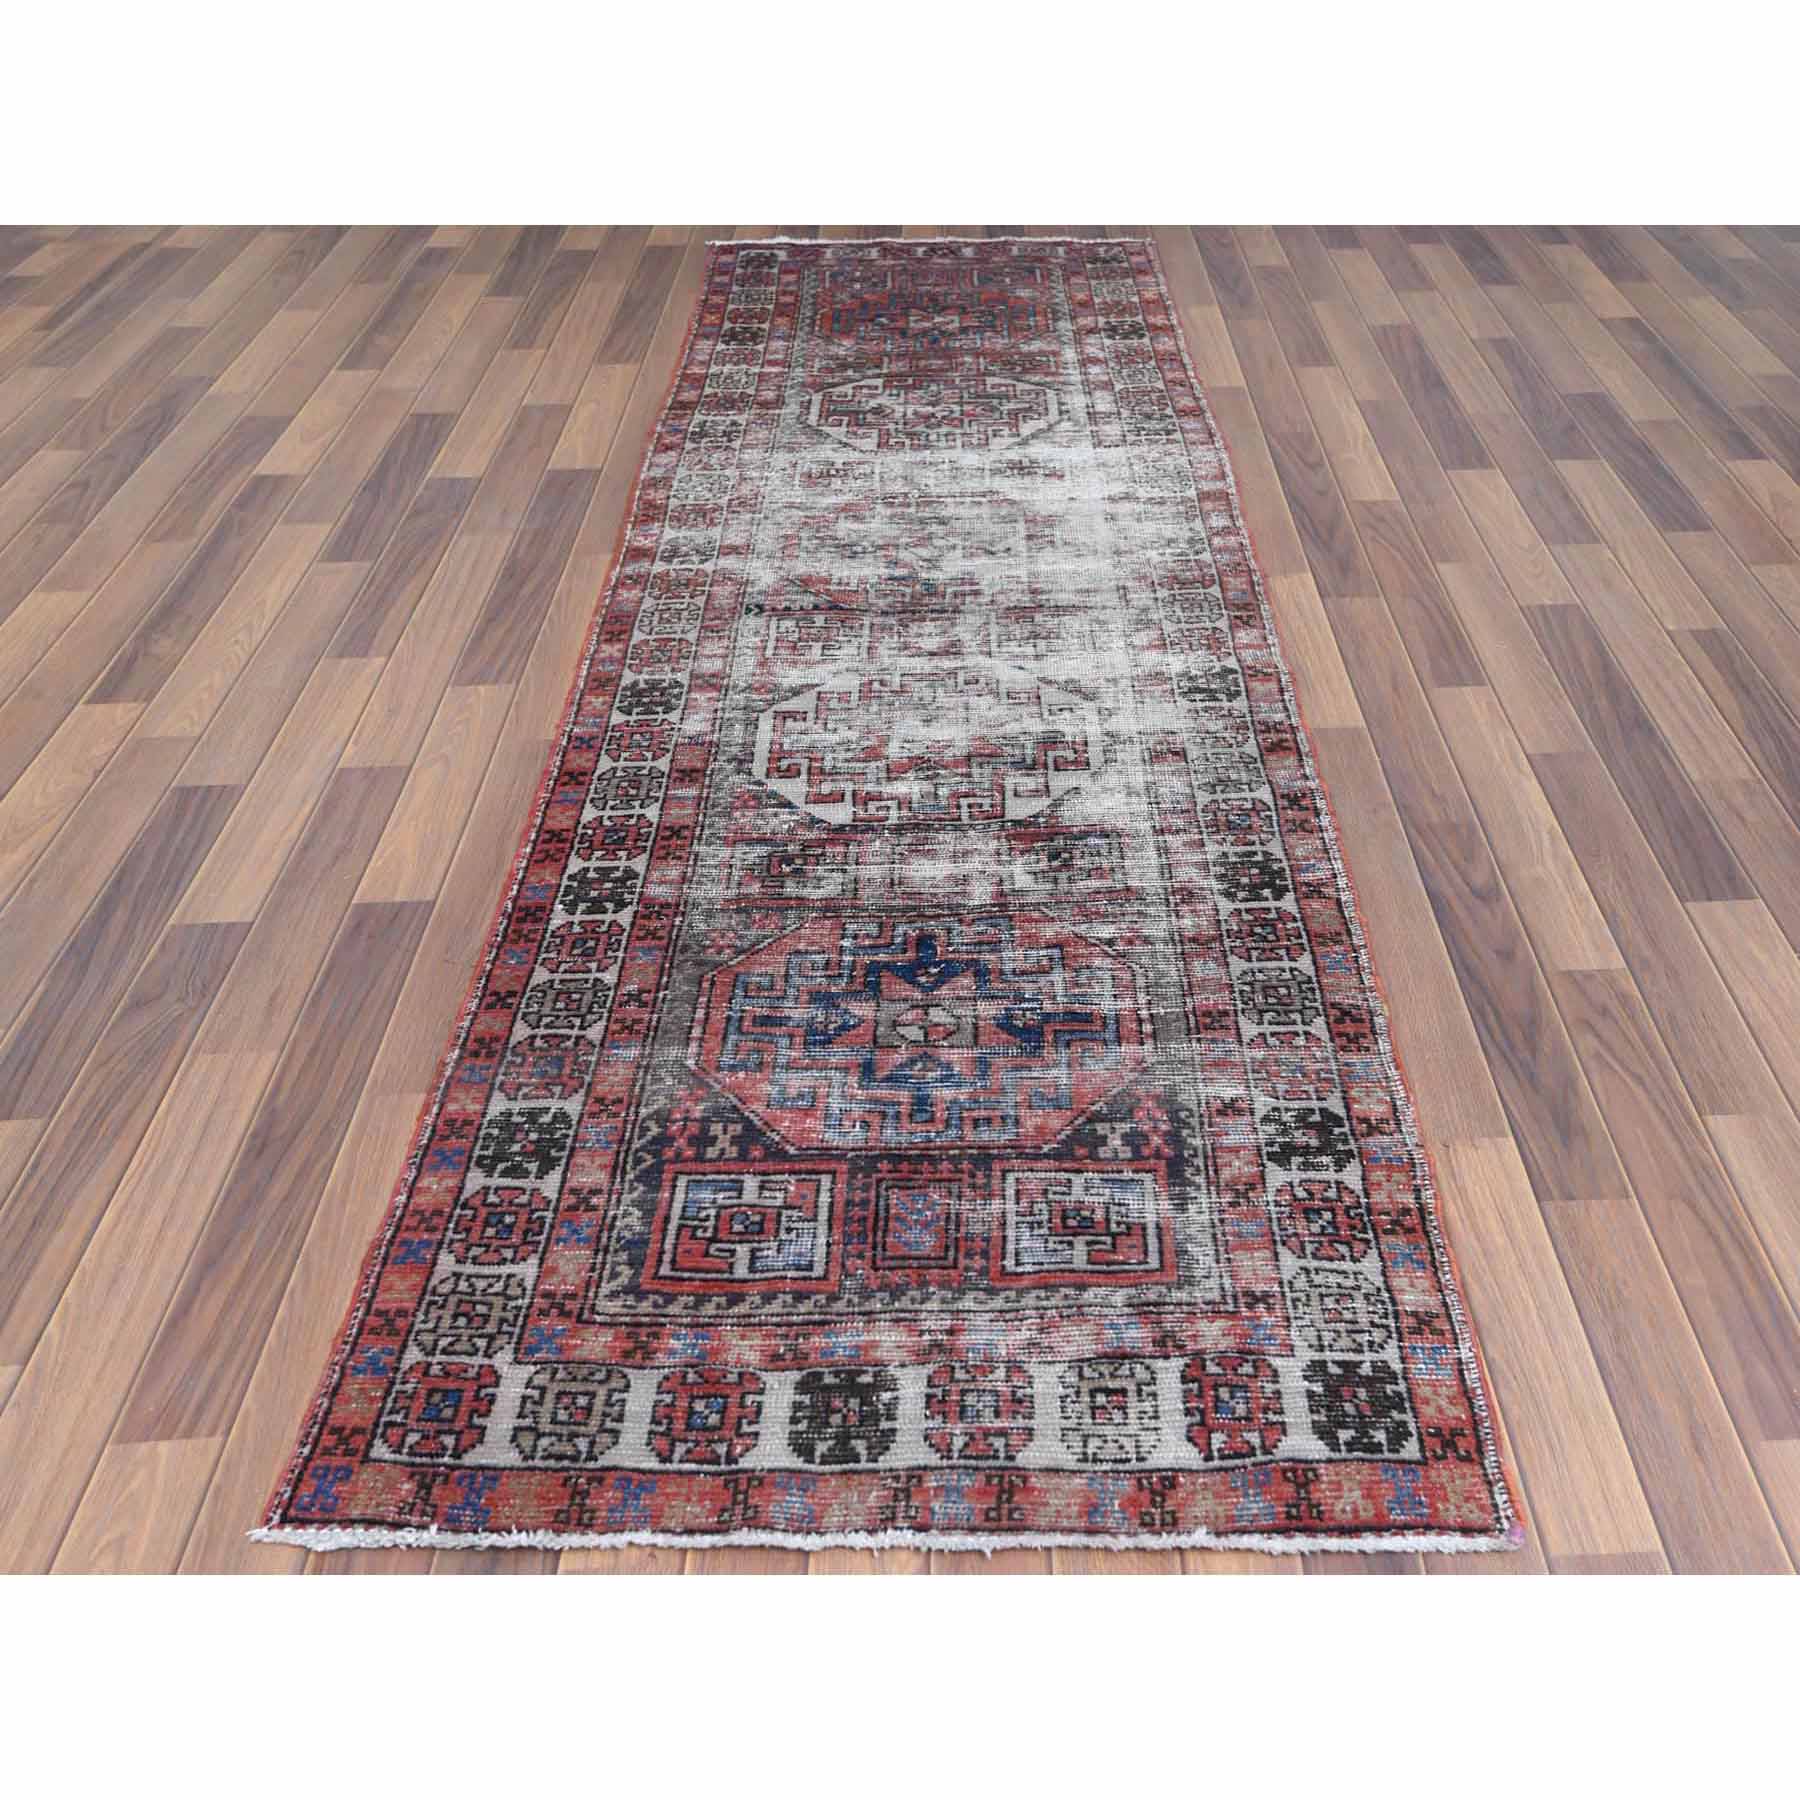 Overdyed-Vintage-Hand-Knotted-Rug-304730